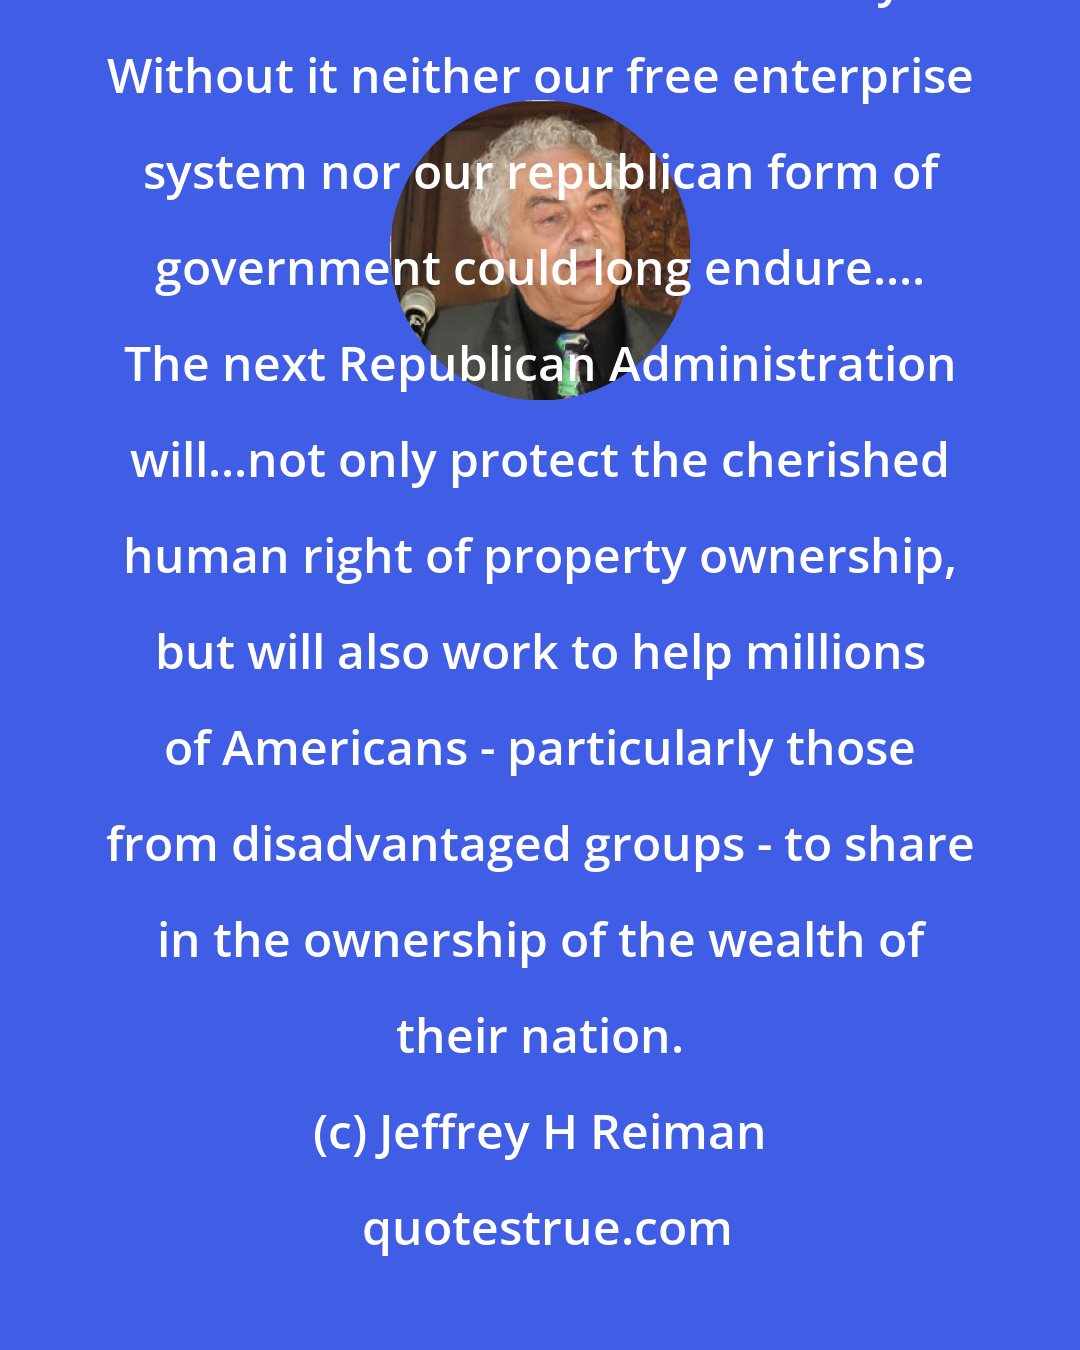 Jeffrey H Reiman: The widespread distribution of private property ownership is the cornerstone of American liberty. Without it neither our free enterprise system nor our republican form of government could long endure.... The next Republican Administration will...not only protect the cherished human right of property ownership, but will also work to help millions of Americans - particularly those from disadvantaged groups - to share in the ownership of the wealth of their nation.